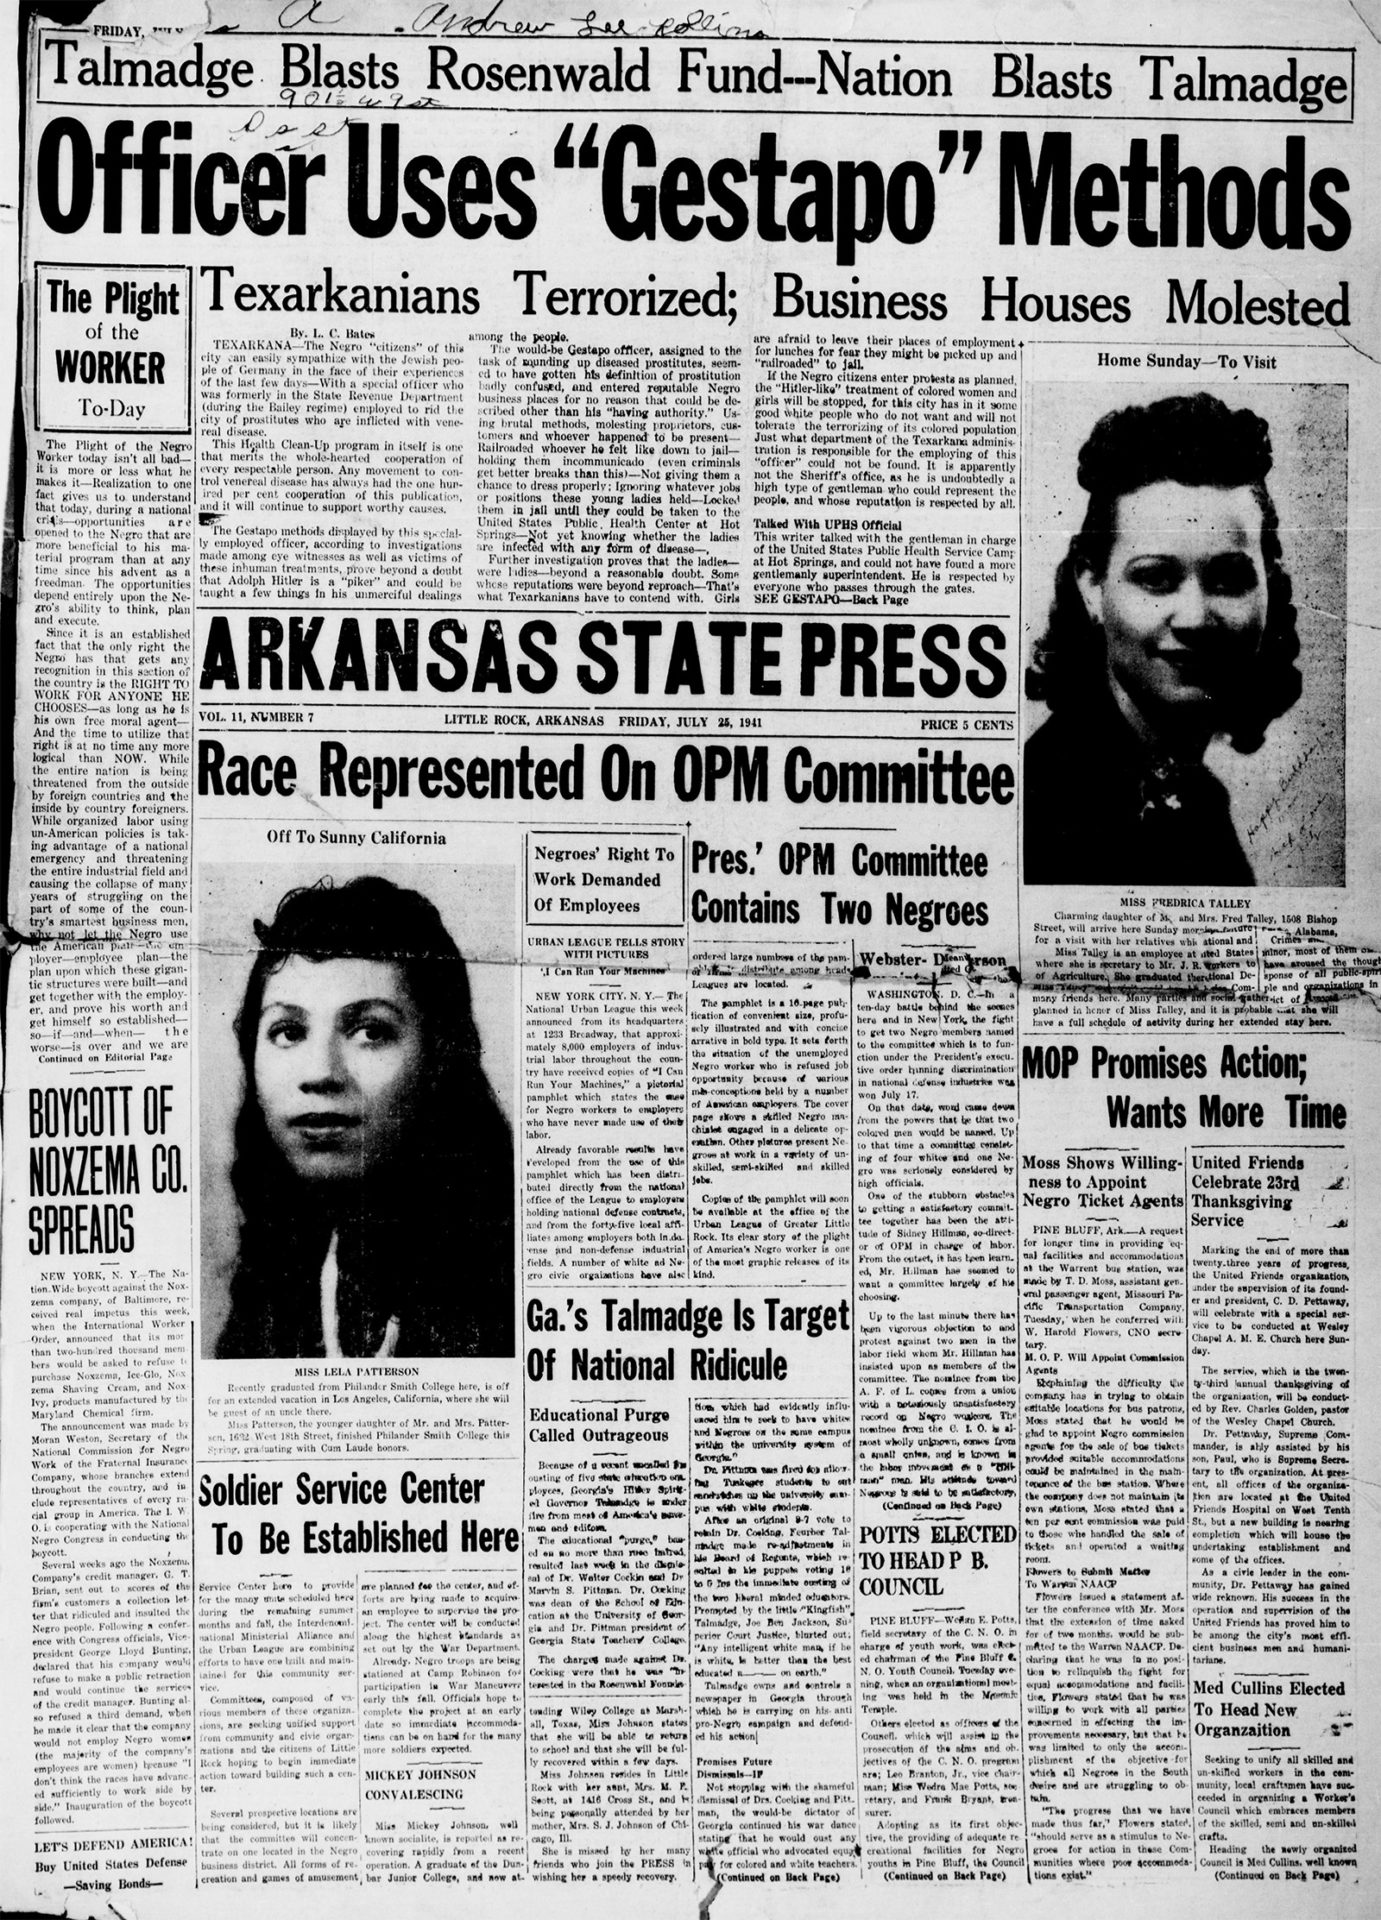 Newspaper front page "Arkansas State Press"